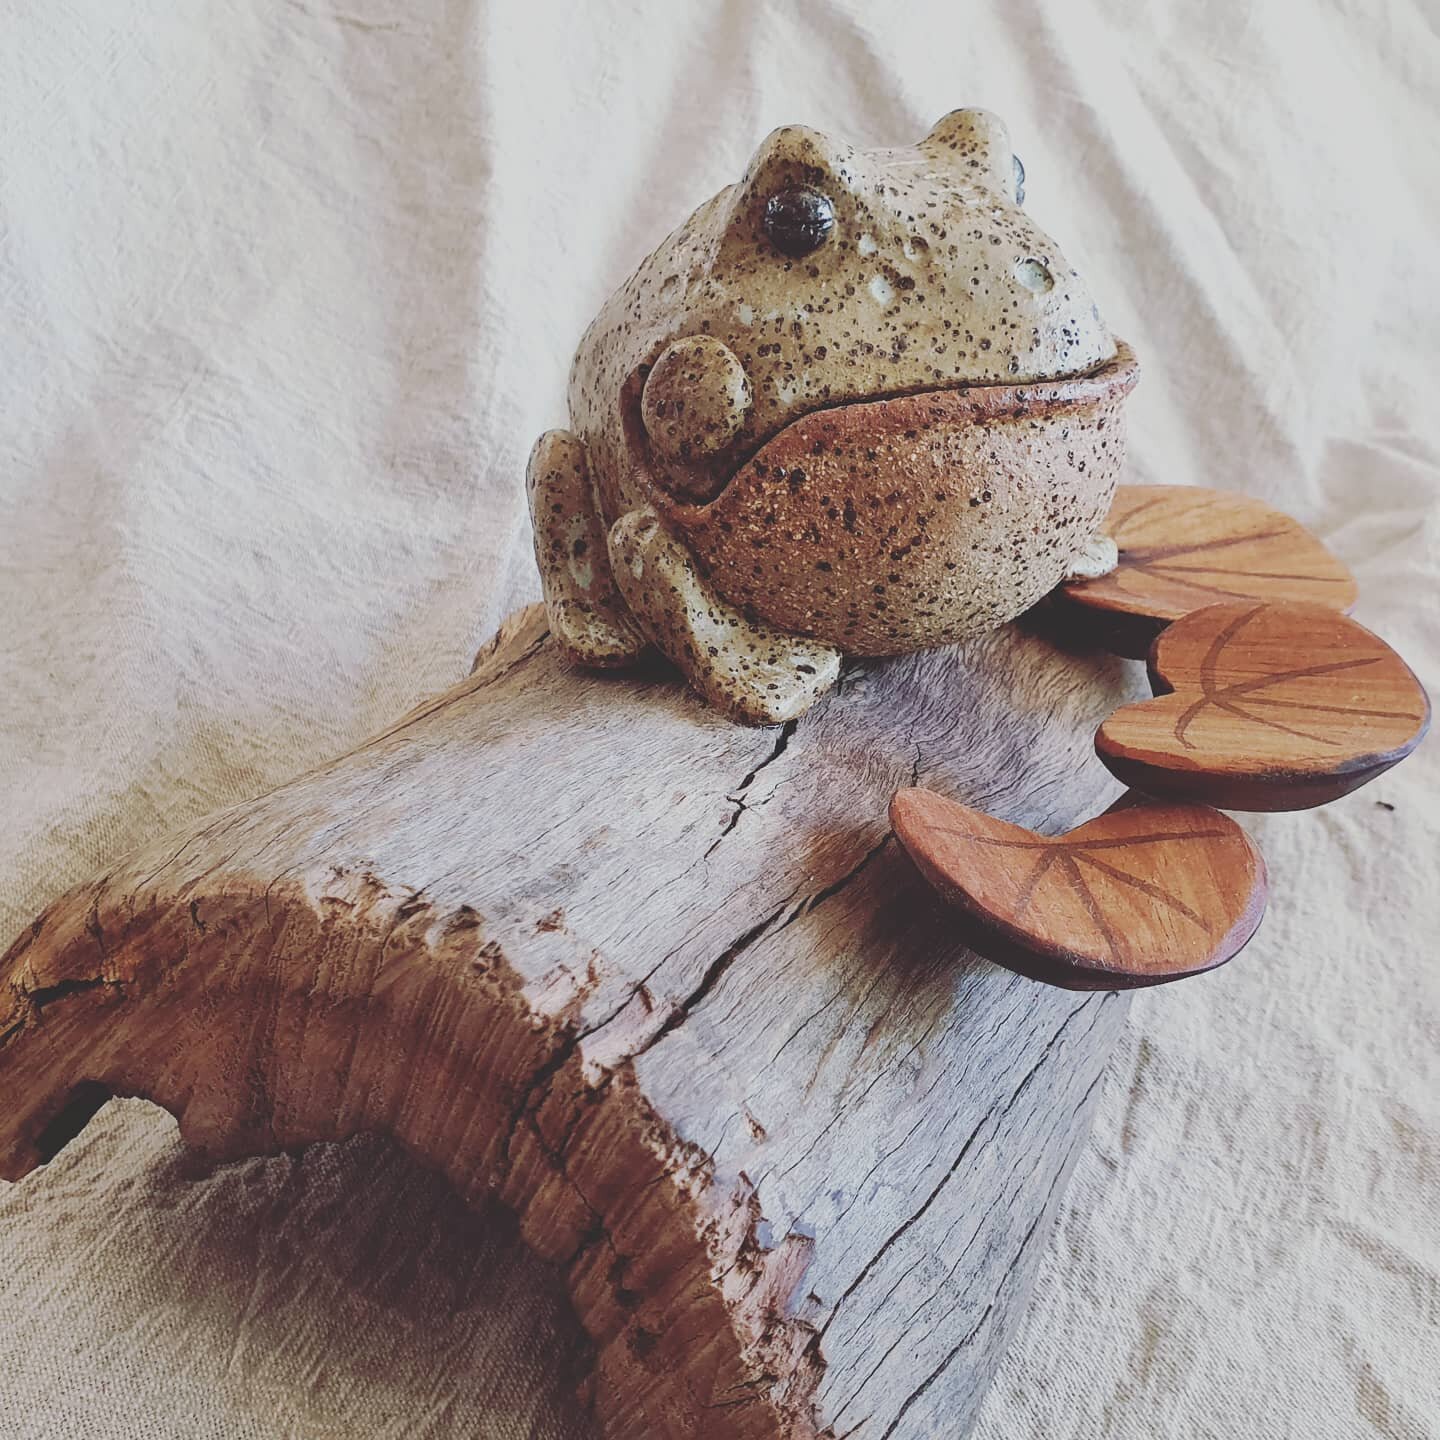 ...And here's my Frog on a Log 😁 Pottery and wood. #madeinclay #rutherglenvic #rutherglenartshow #tasteofrutherglen